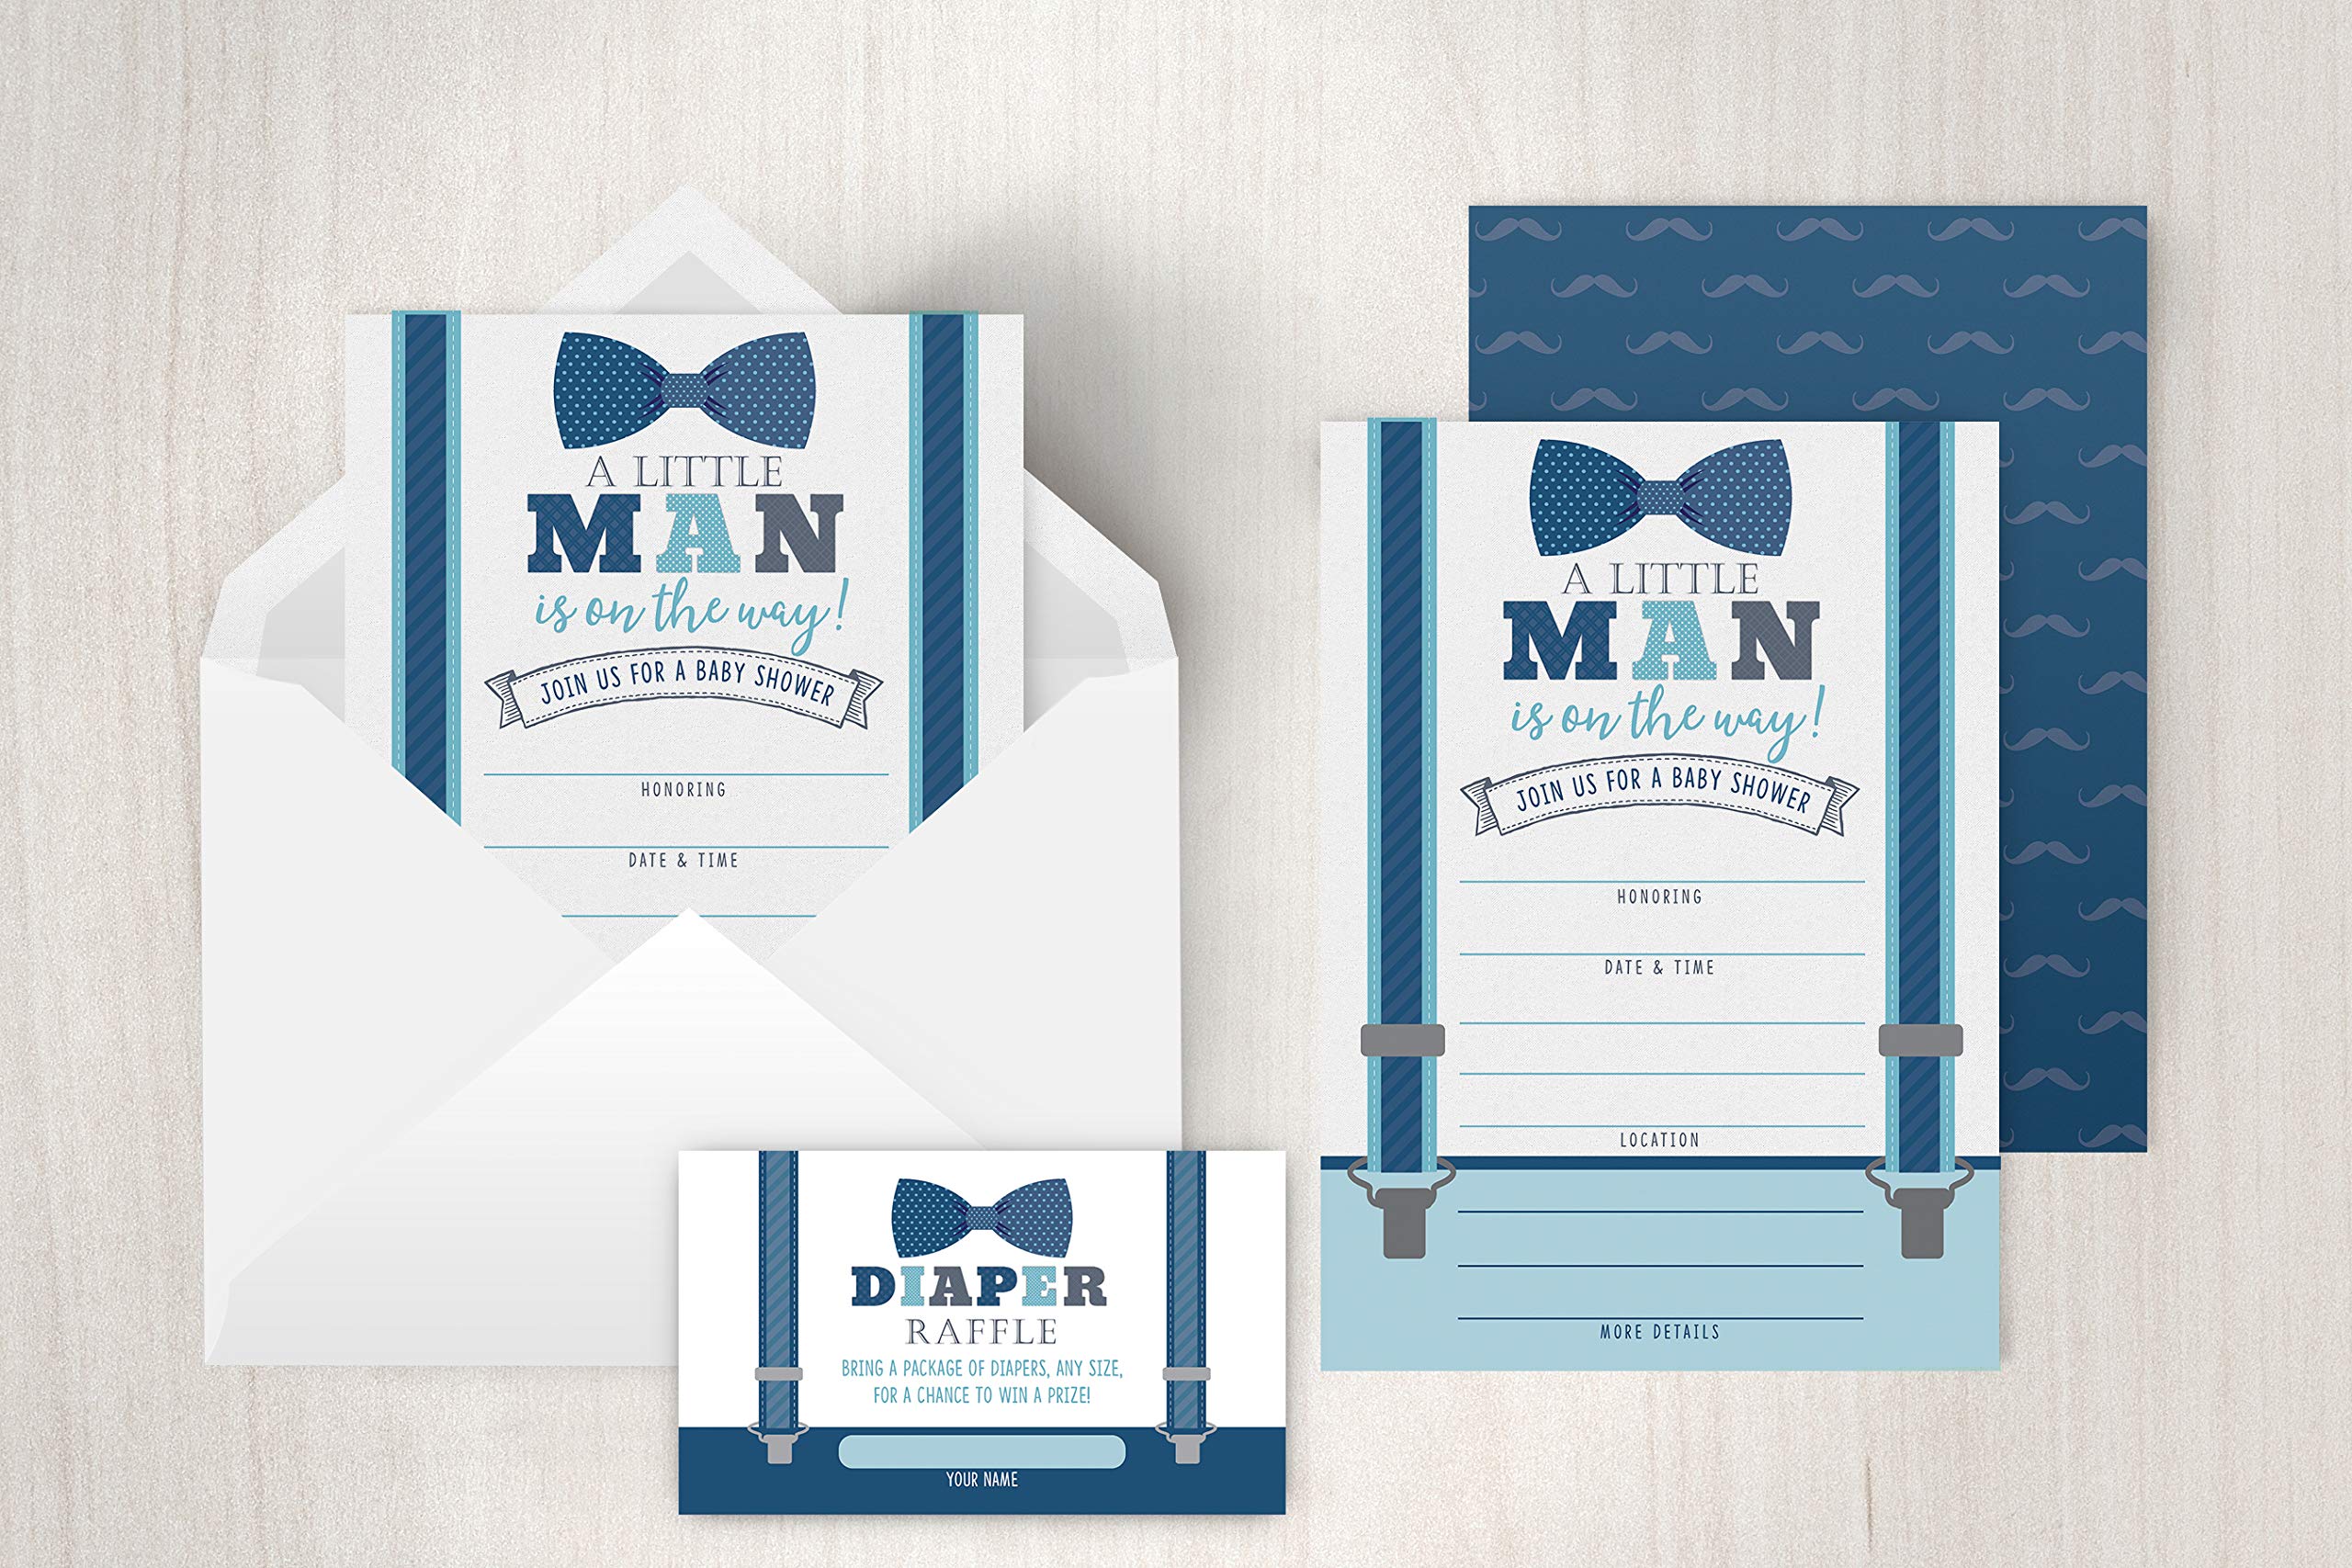 Your Main Event Prints Little Man Baby Shower Invitations, Boy Baby Shower Invites with Diaper Raffles Cards, Bow Tie and Mustaches, Sprinkle, 20 Invites Including Envelopes